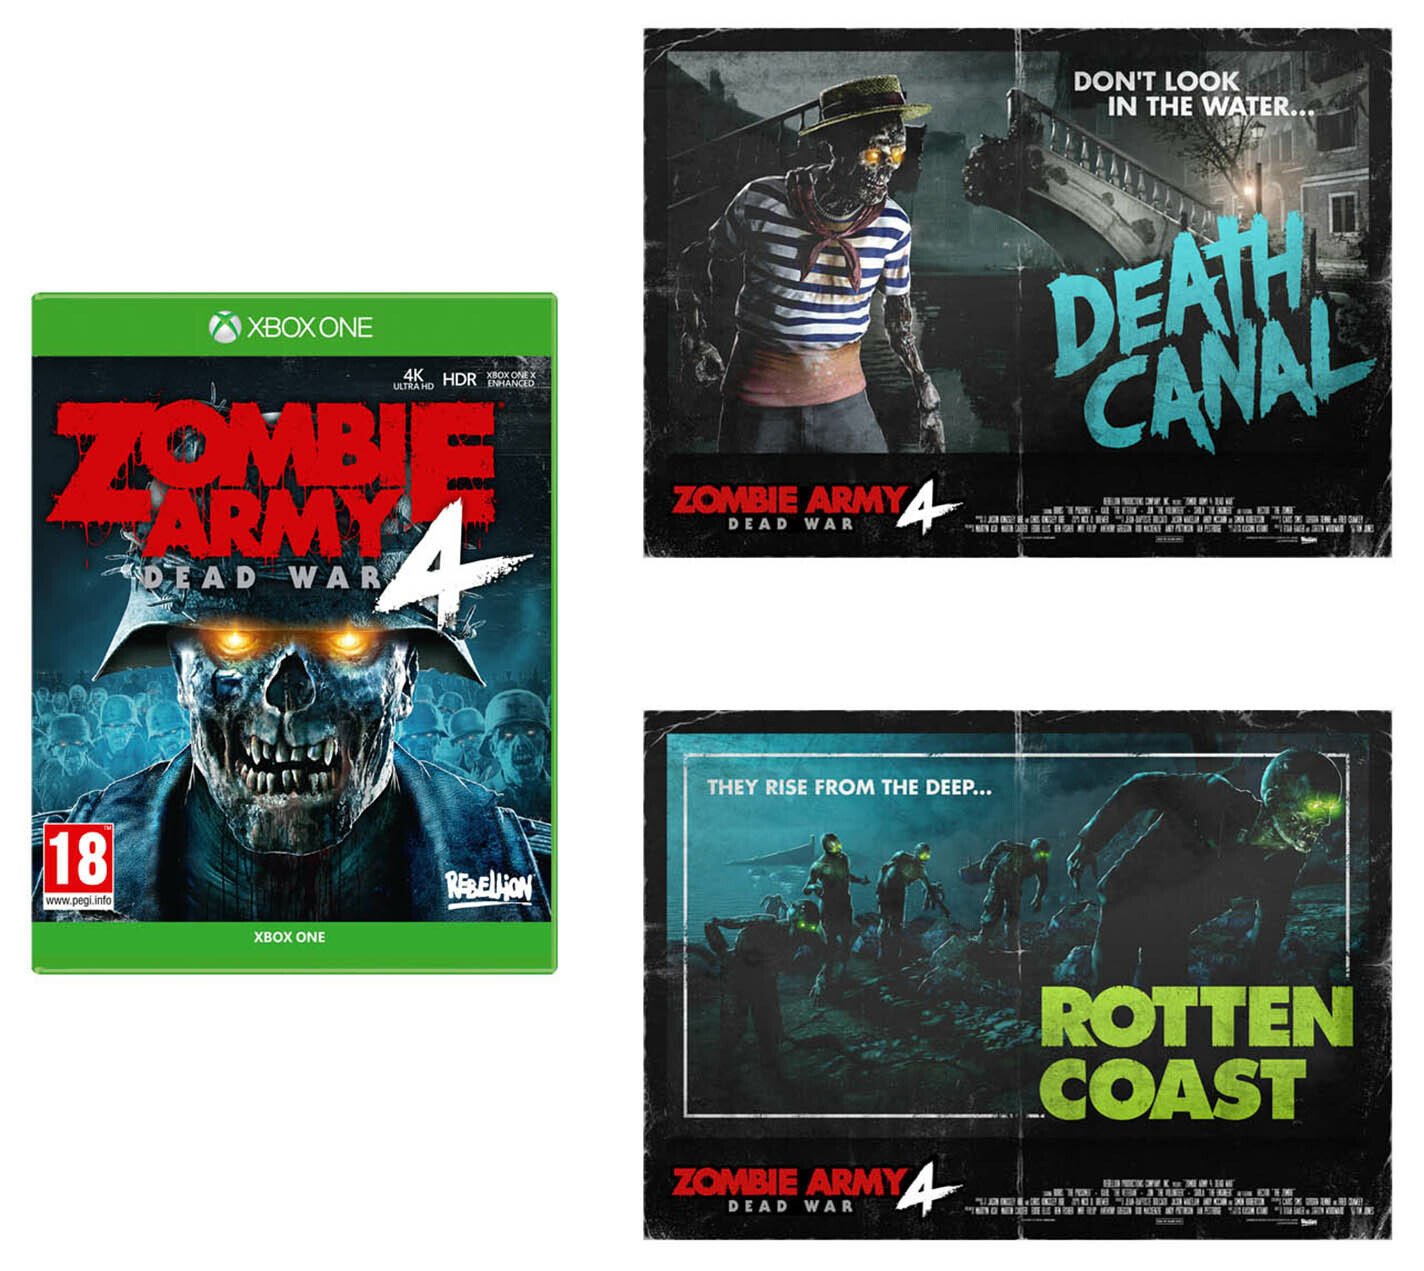 Zombie Army 4 Xbox One Game & Poster Bundle Review